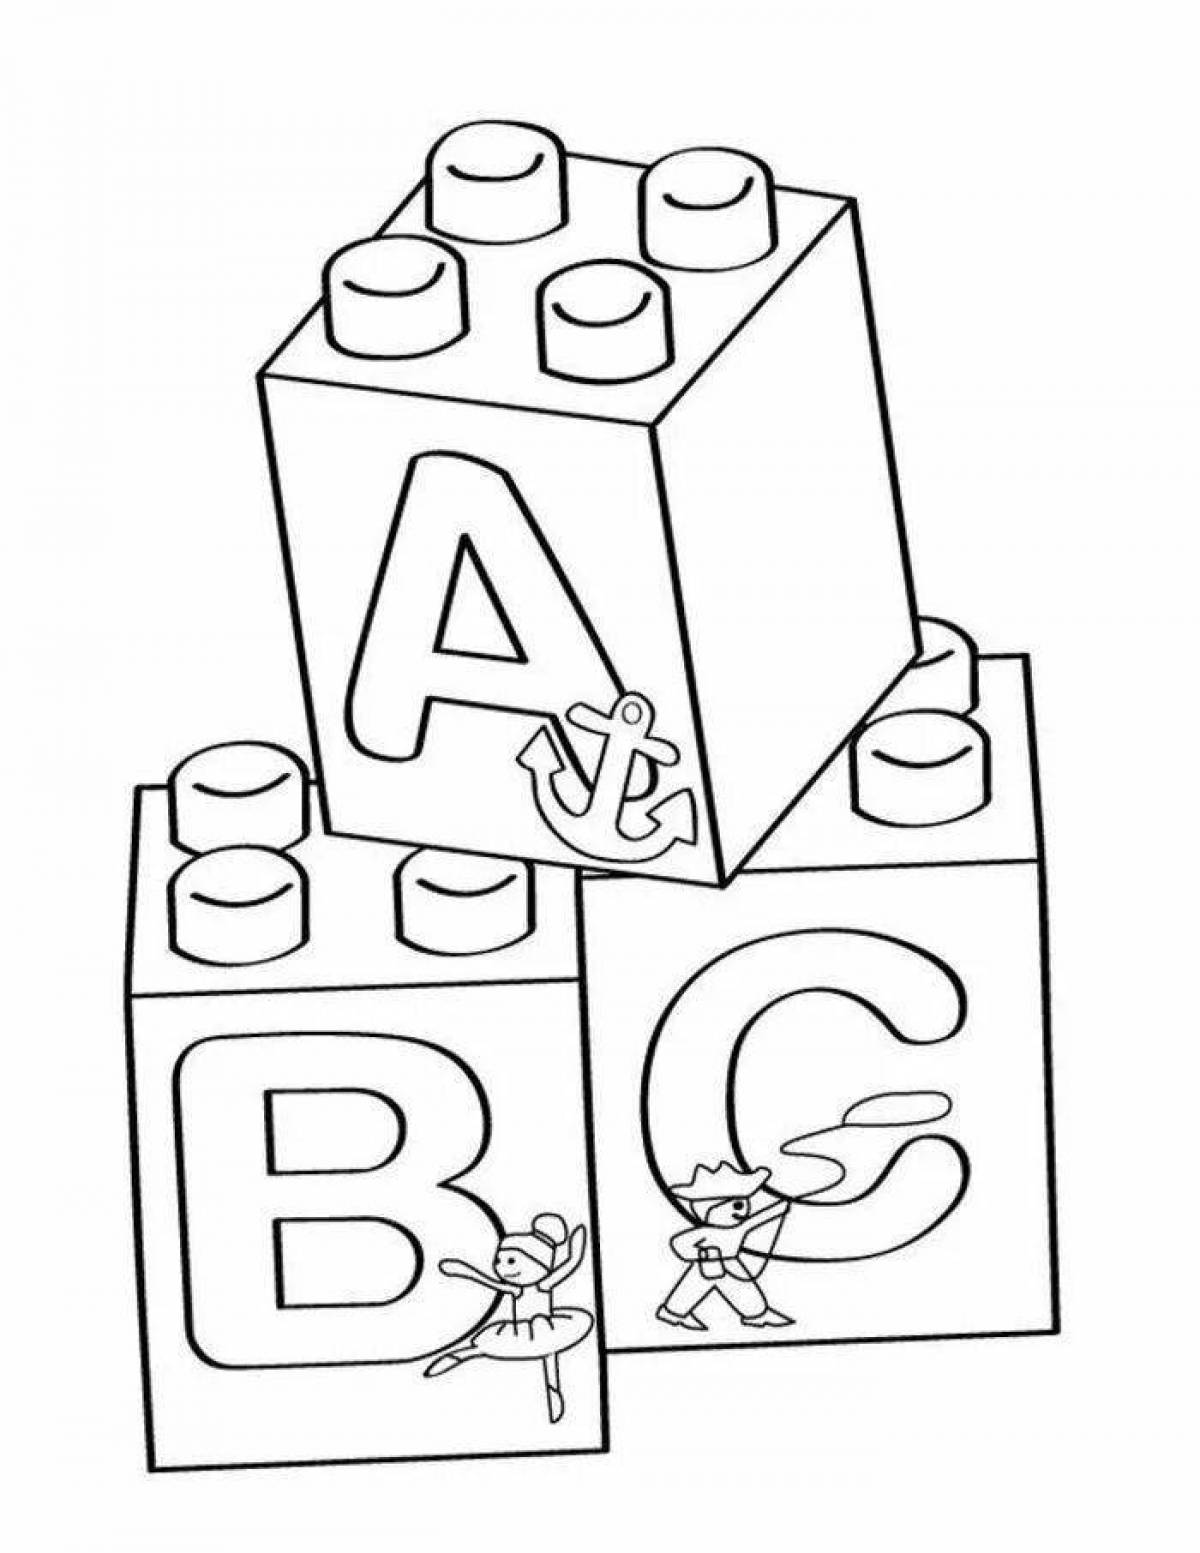 Magic abc coloring page